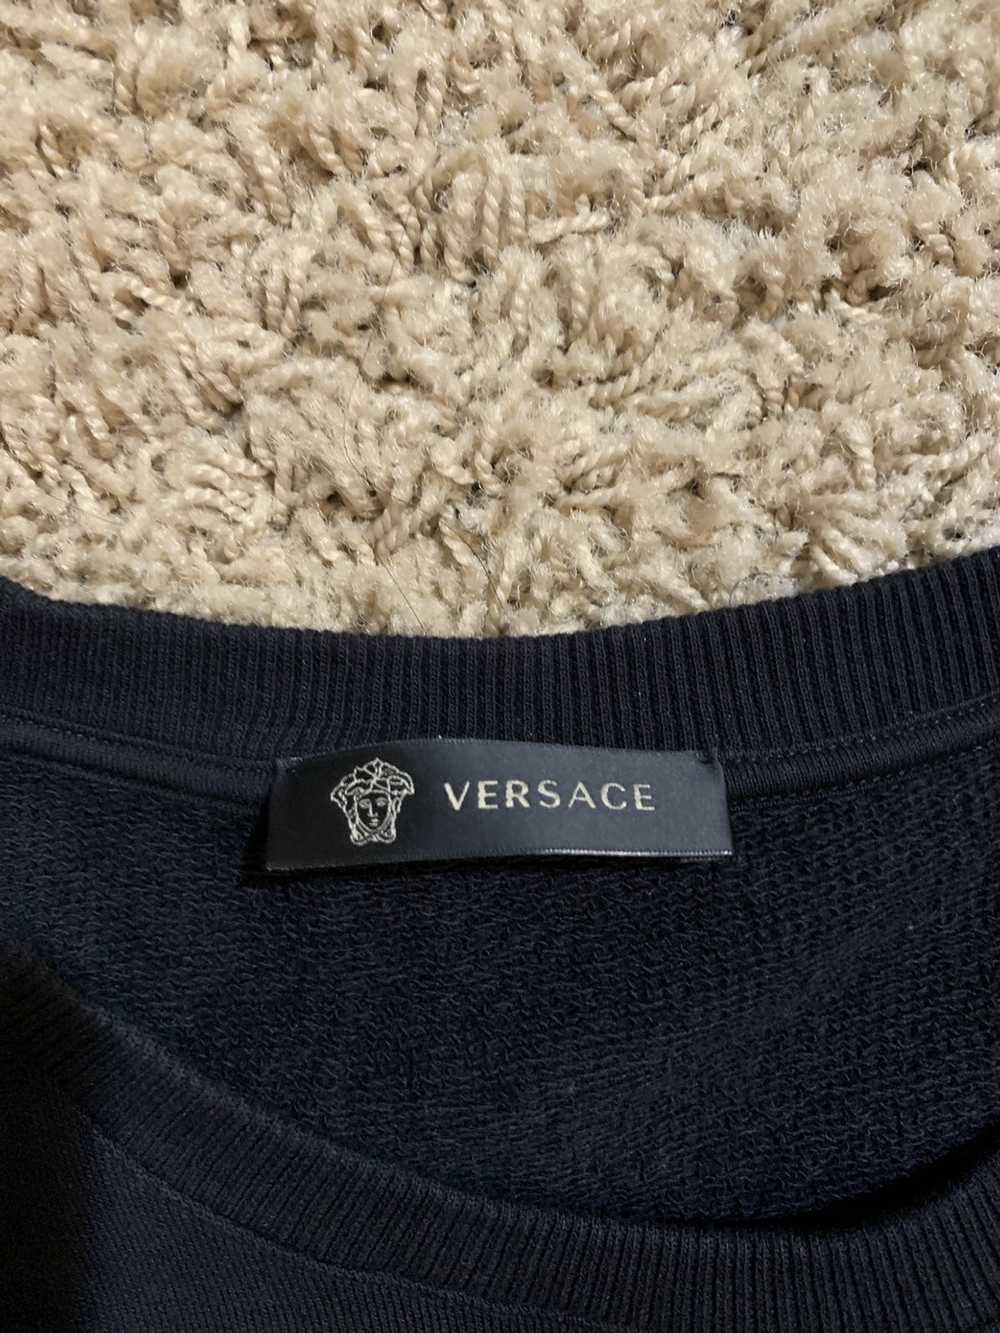 Versace Versace Embroidered Sweater - image 3